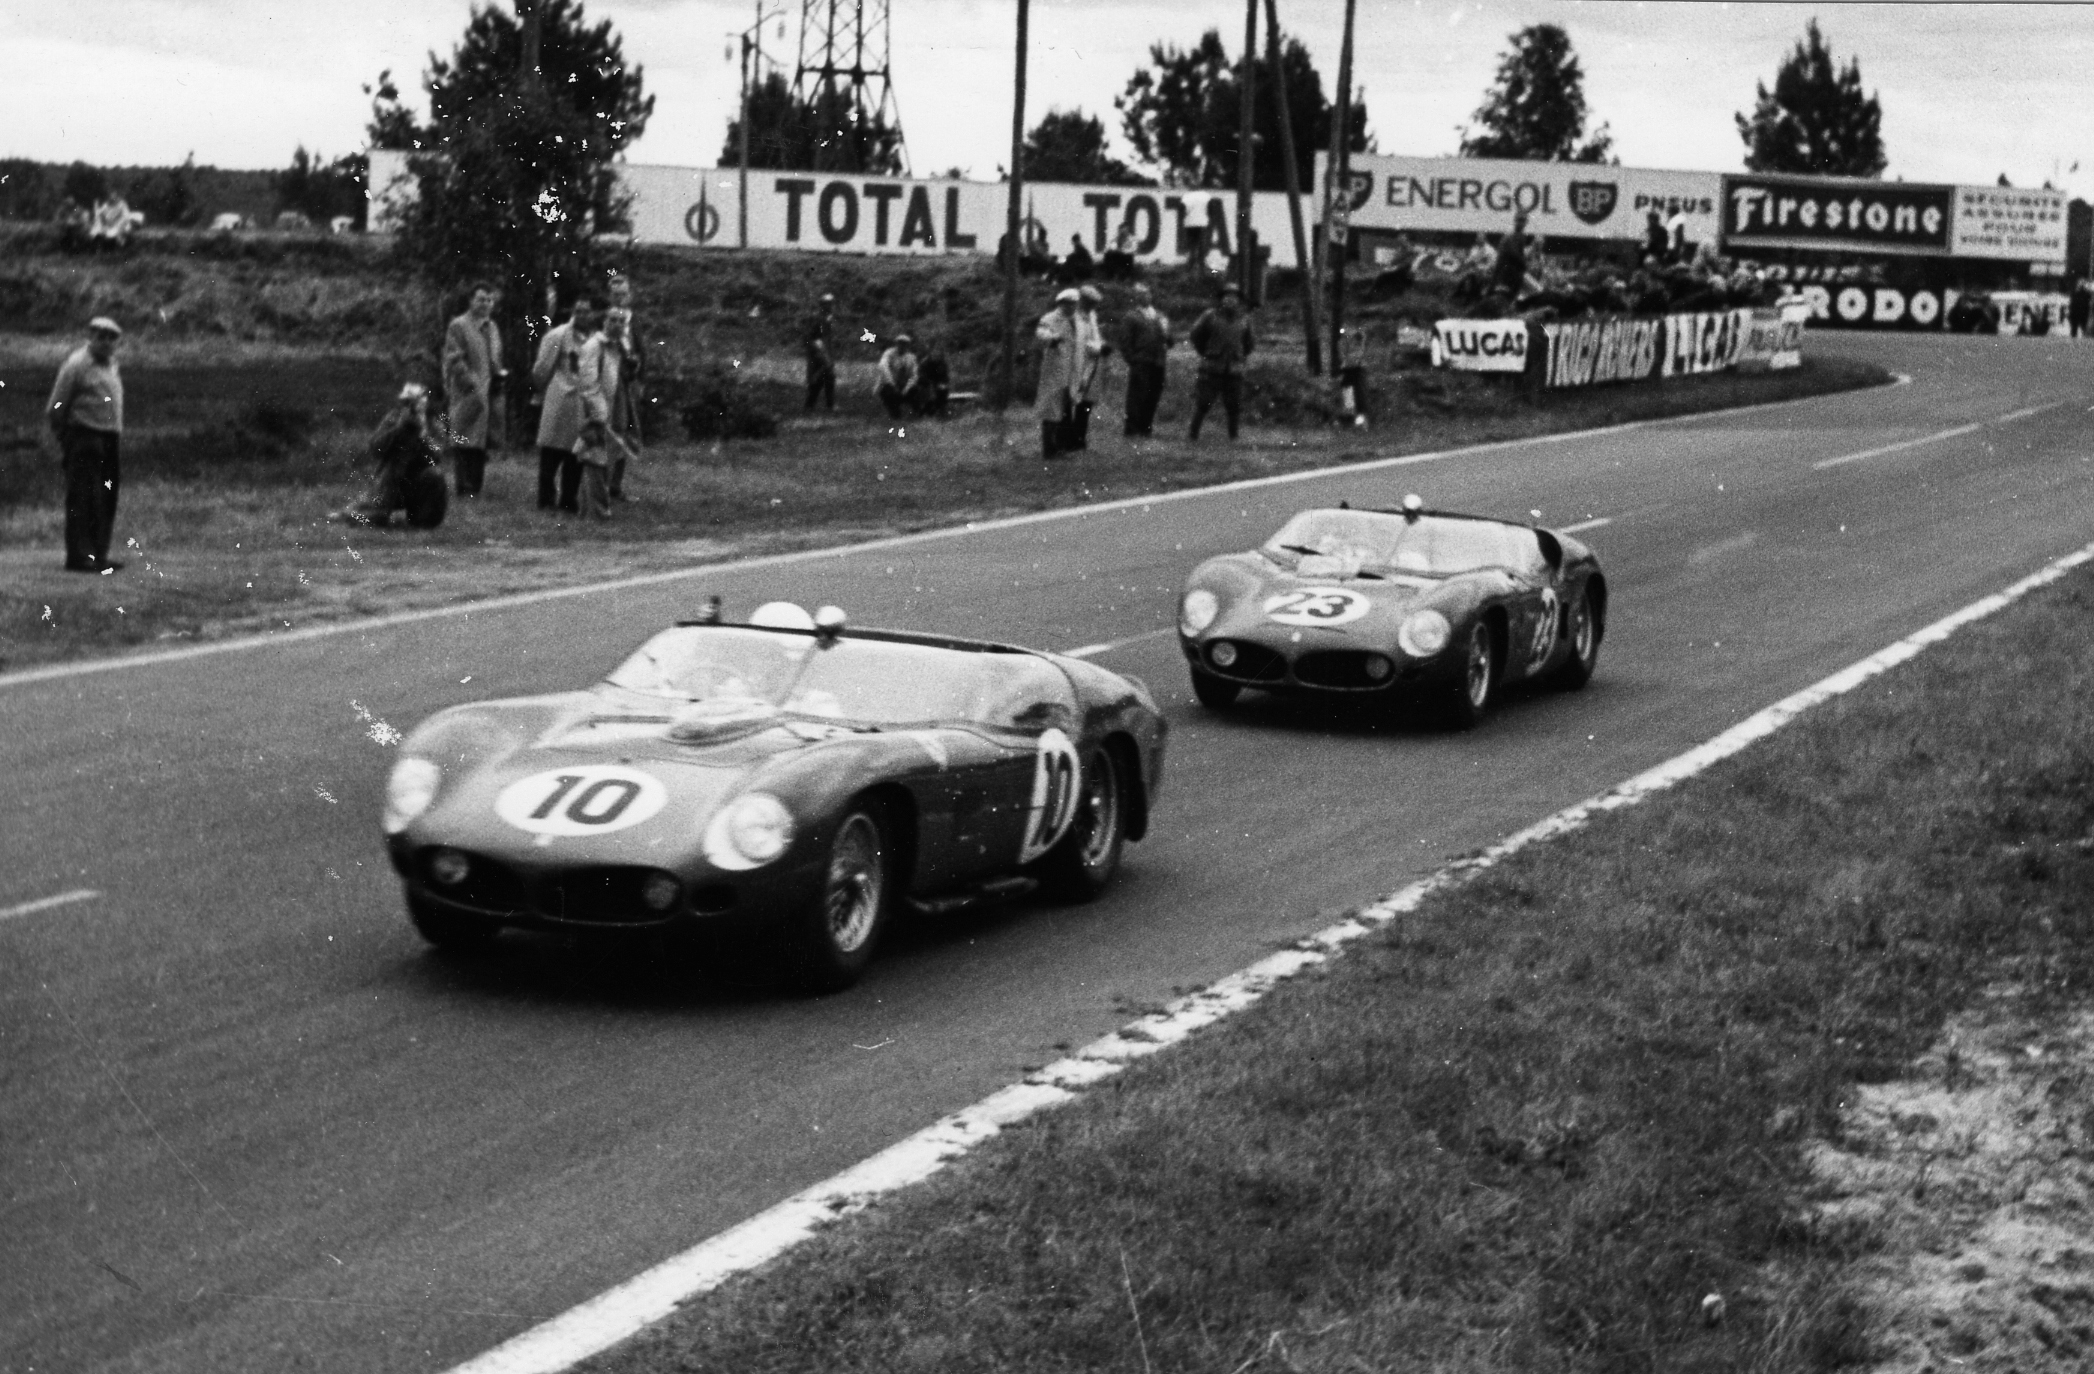 The 1961 24 Hours pitted Ferraris against each other, with the TRI/61 equipped with a 3-litre V12, the Maserati Tipo 63 as well as the Aston Martin DBR1/300. But the Scuderia dominated.